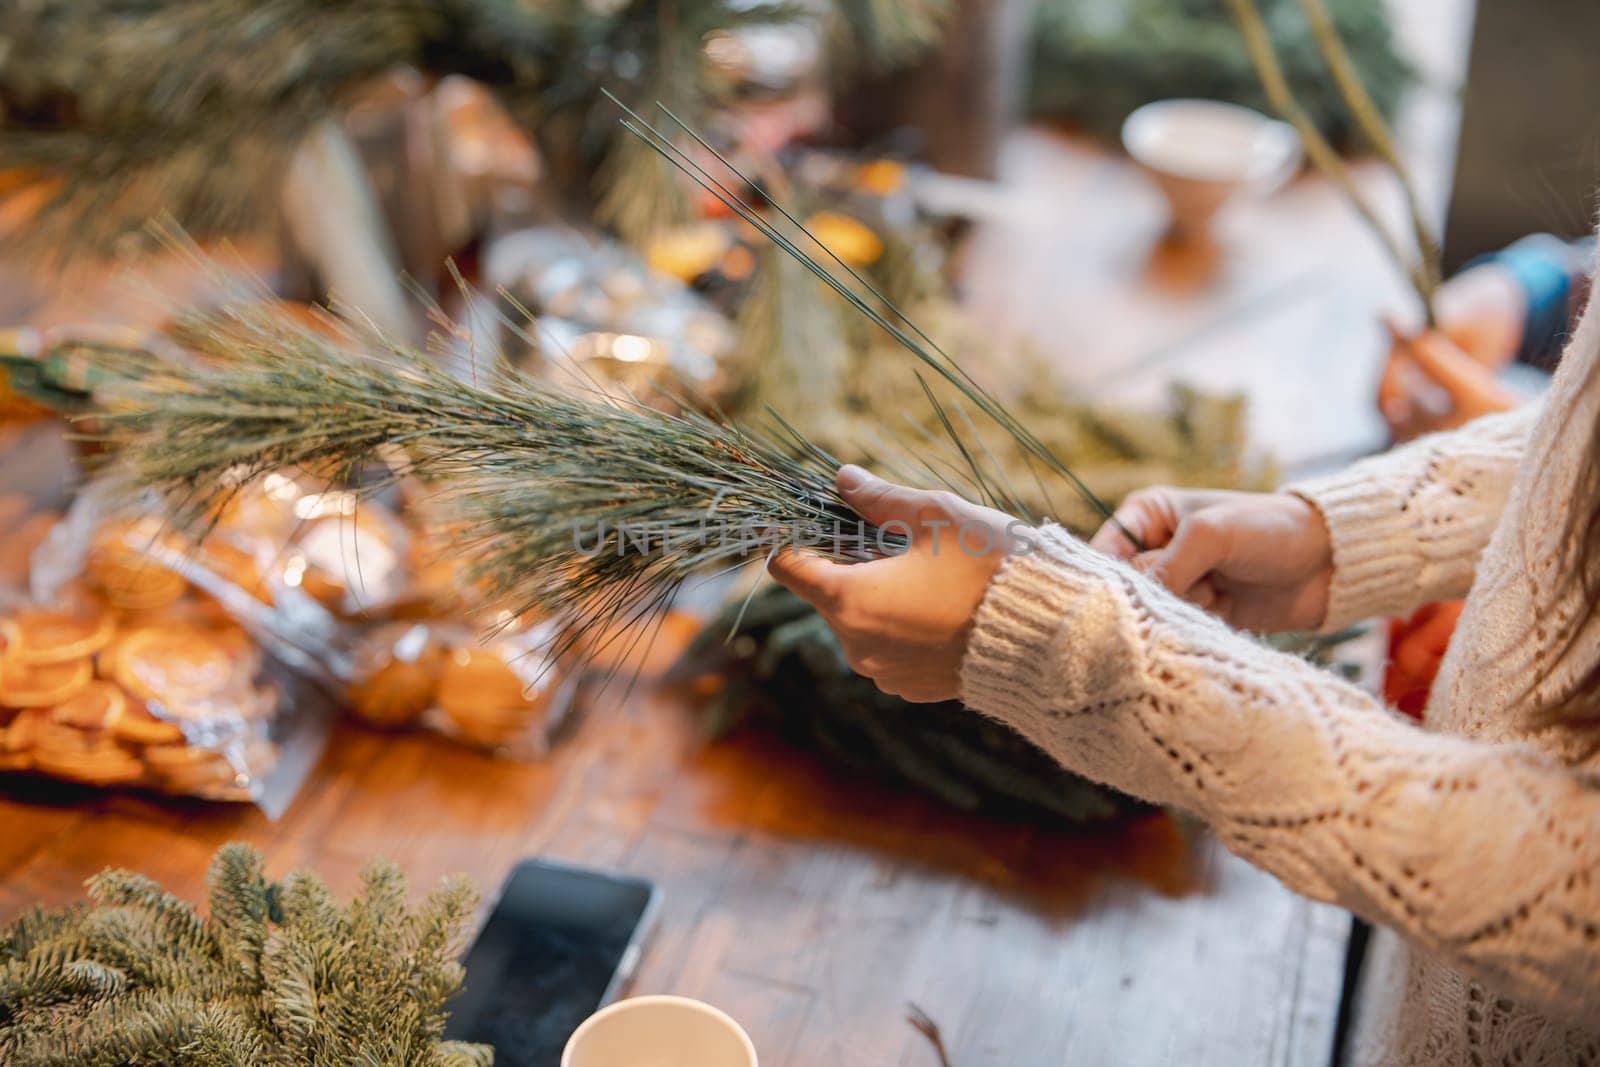 A young girl crafting a Christmas wreath during a decor-making masterclass. High quality photo